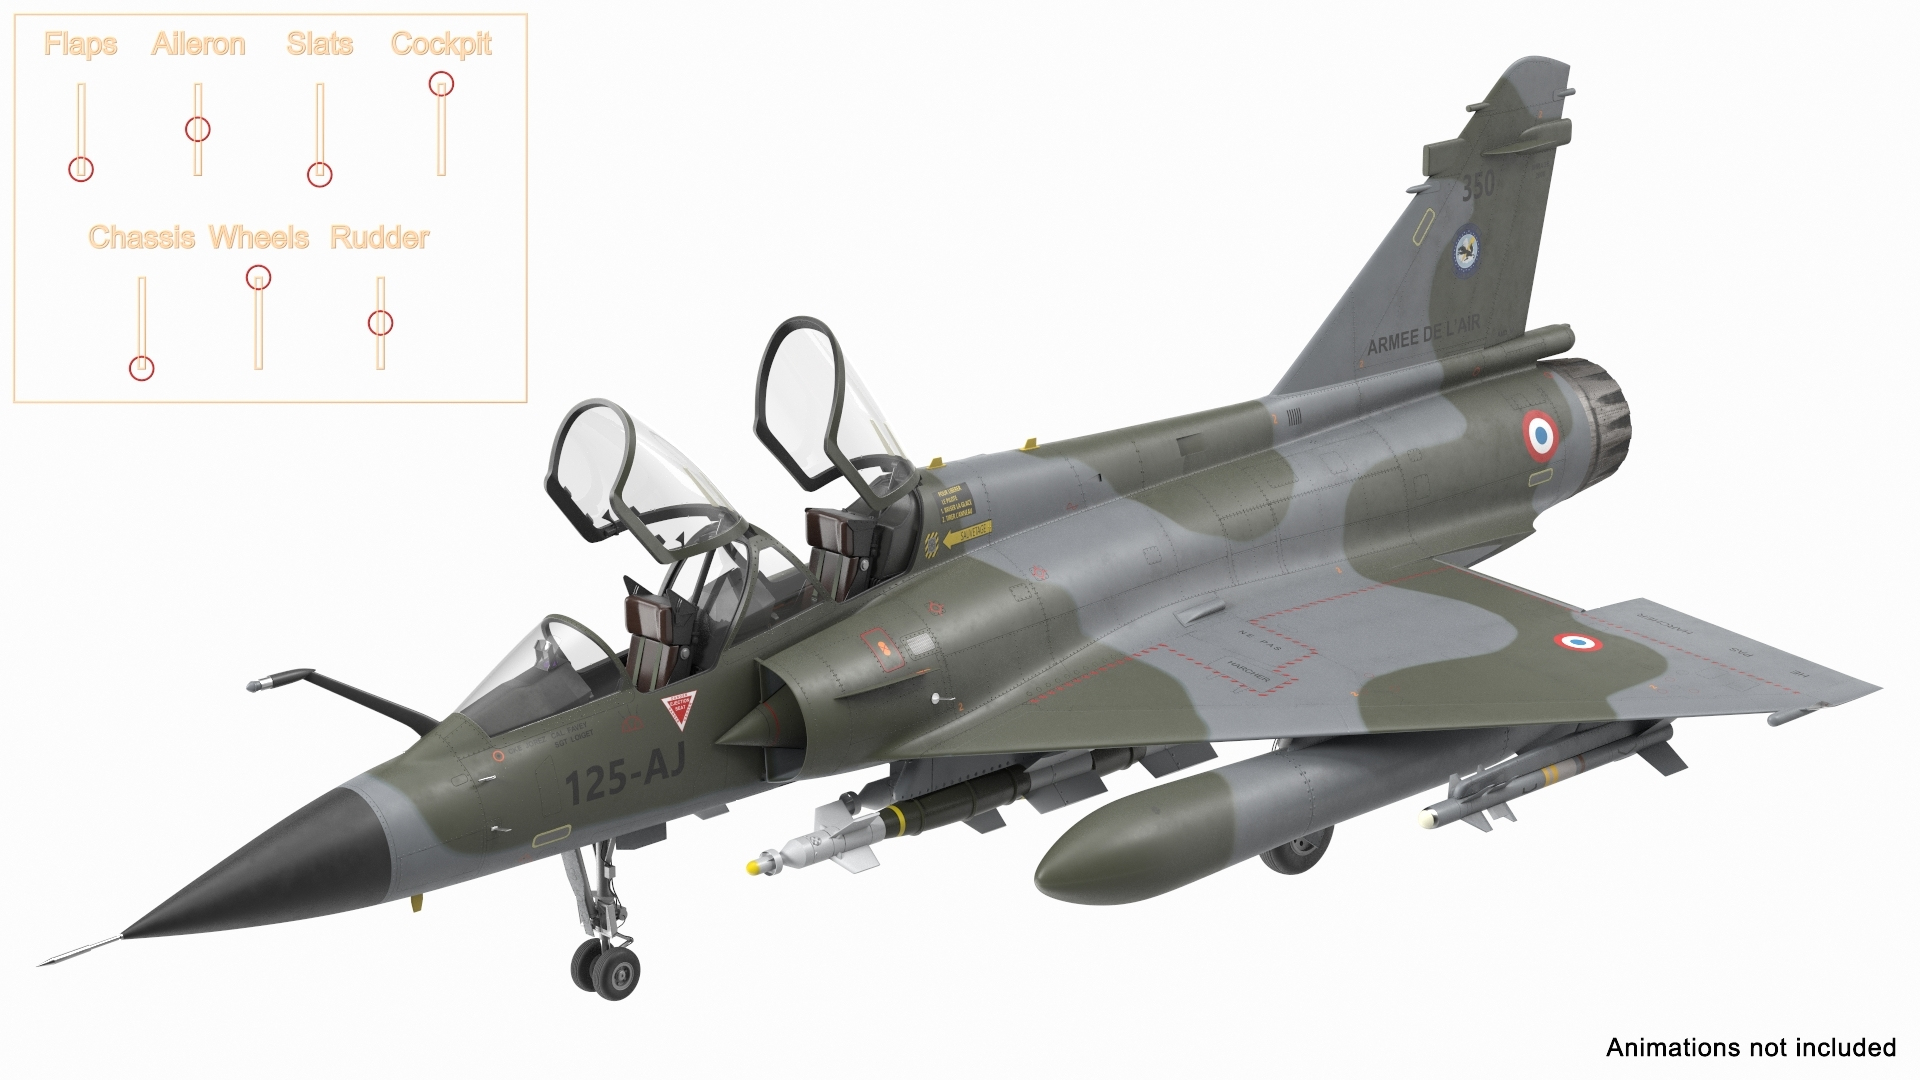 Dassault Mirage 2000N Tactical Bomber Camouflage with Armament Rigged model https://p.turbosquid.com/ts-thumb/np/jUCvfy/Y3/dassault_mirage_2000n_tactical_bomber_camouflage_with_armament_rigged_362/jpg/1638174862/1920x1080/turn_fit_q99/72b3719a80e25fbae856f46f3500e94f4b7d7c88/dassault_mirage_2000n_tactical_bomber_camouflage_with_armament_rigged_362-1.jpg